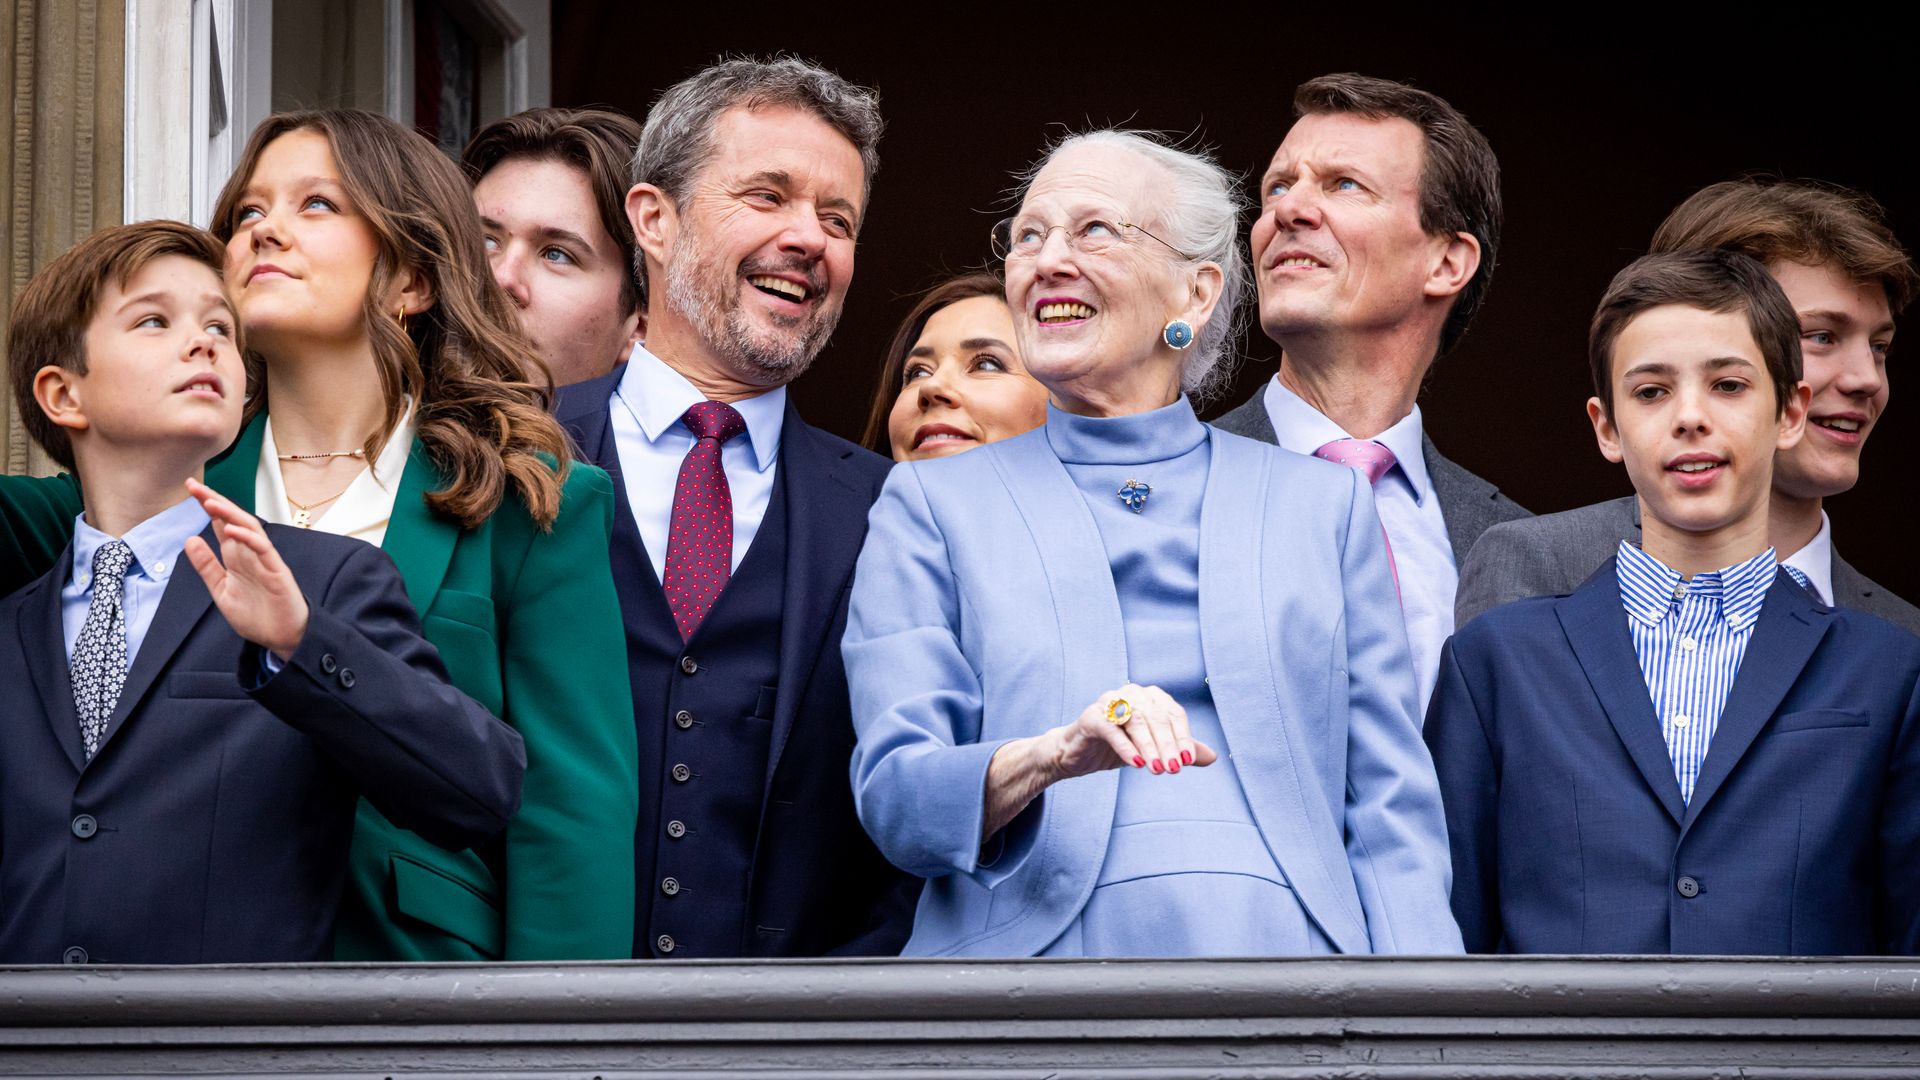 Queen Margrethe standing with Crown Prince Frederik, Prince Joachim and younger members of the Danish royal family